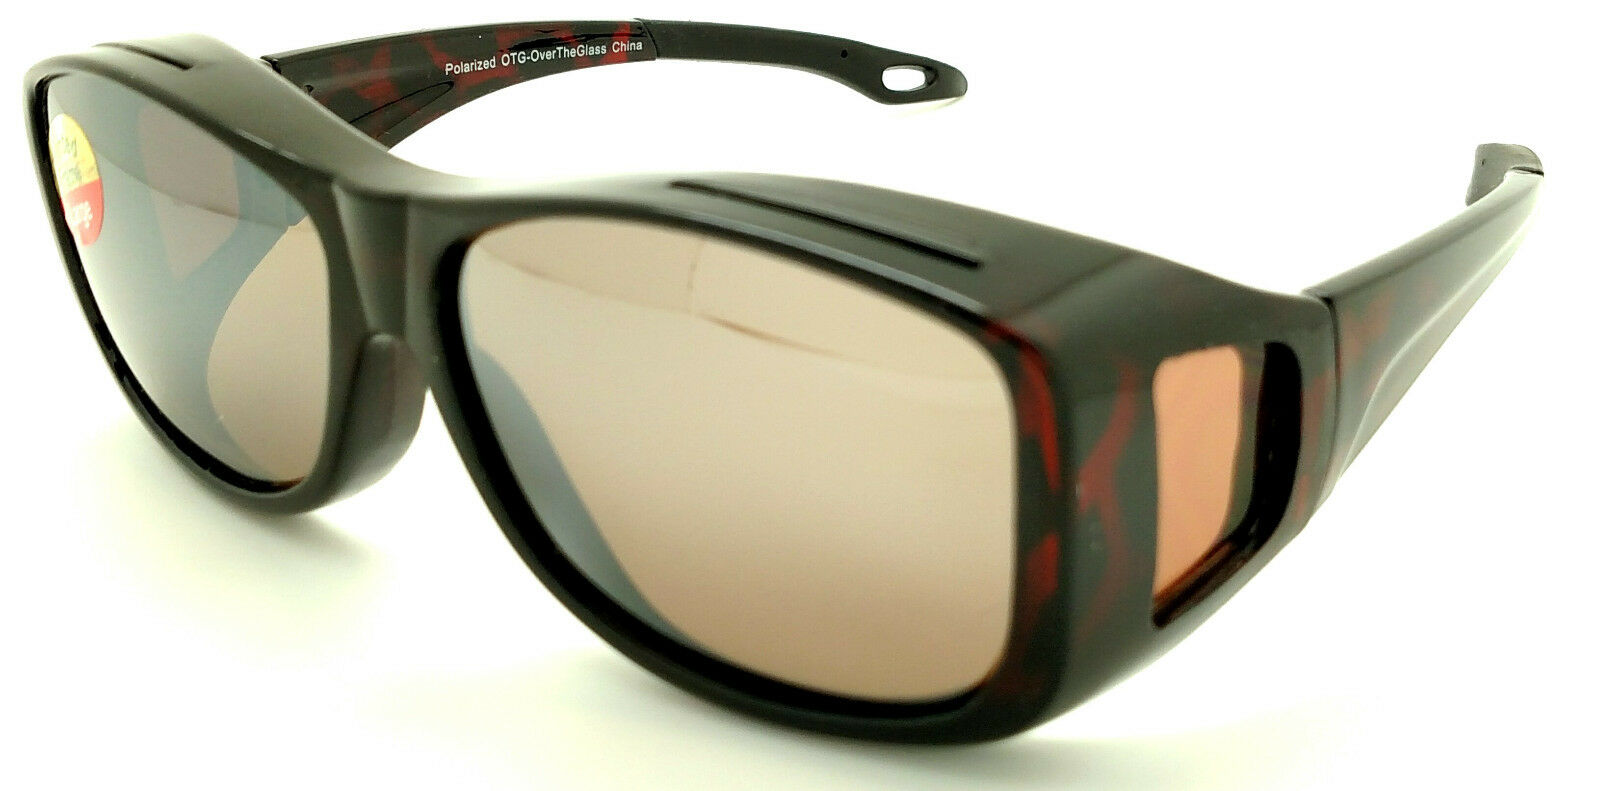 OTG Over-The-Glasses Polarized Brown Lens Ventilated Black sideview frame - multiple sizes available